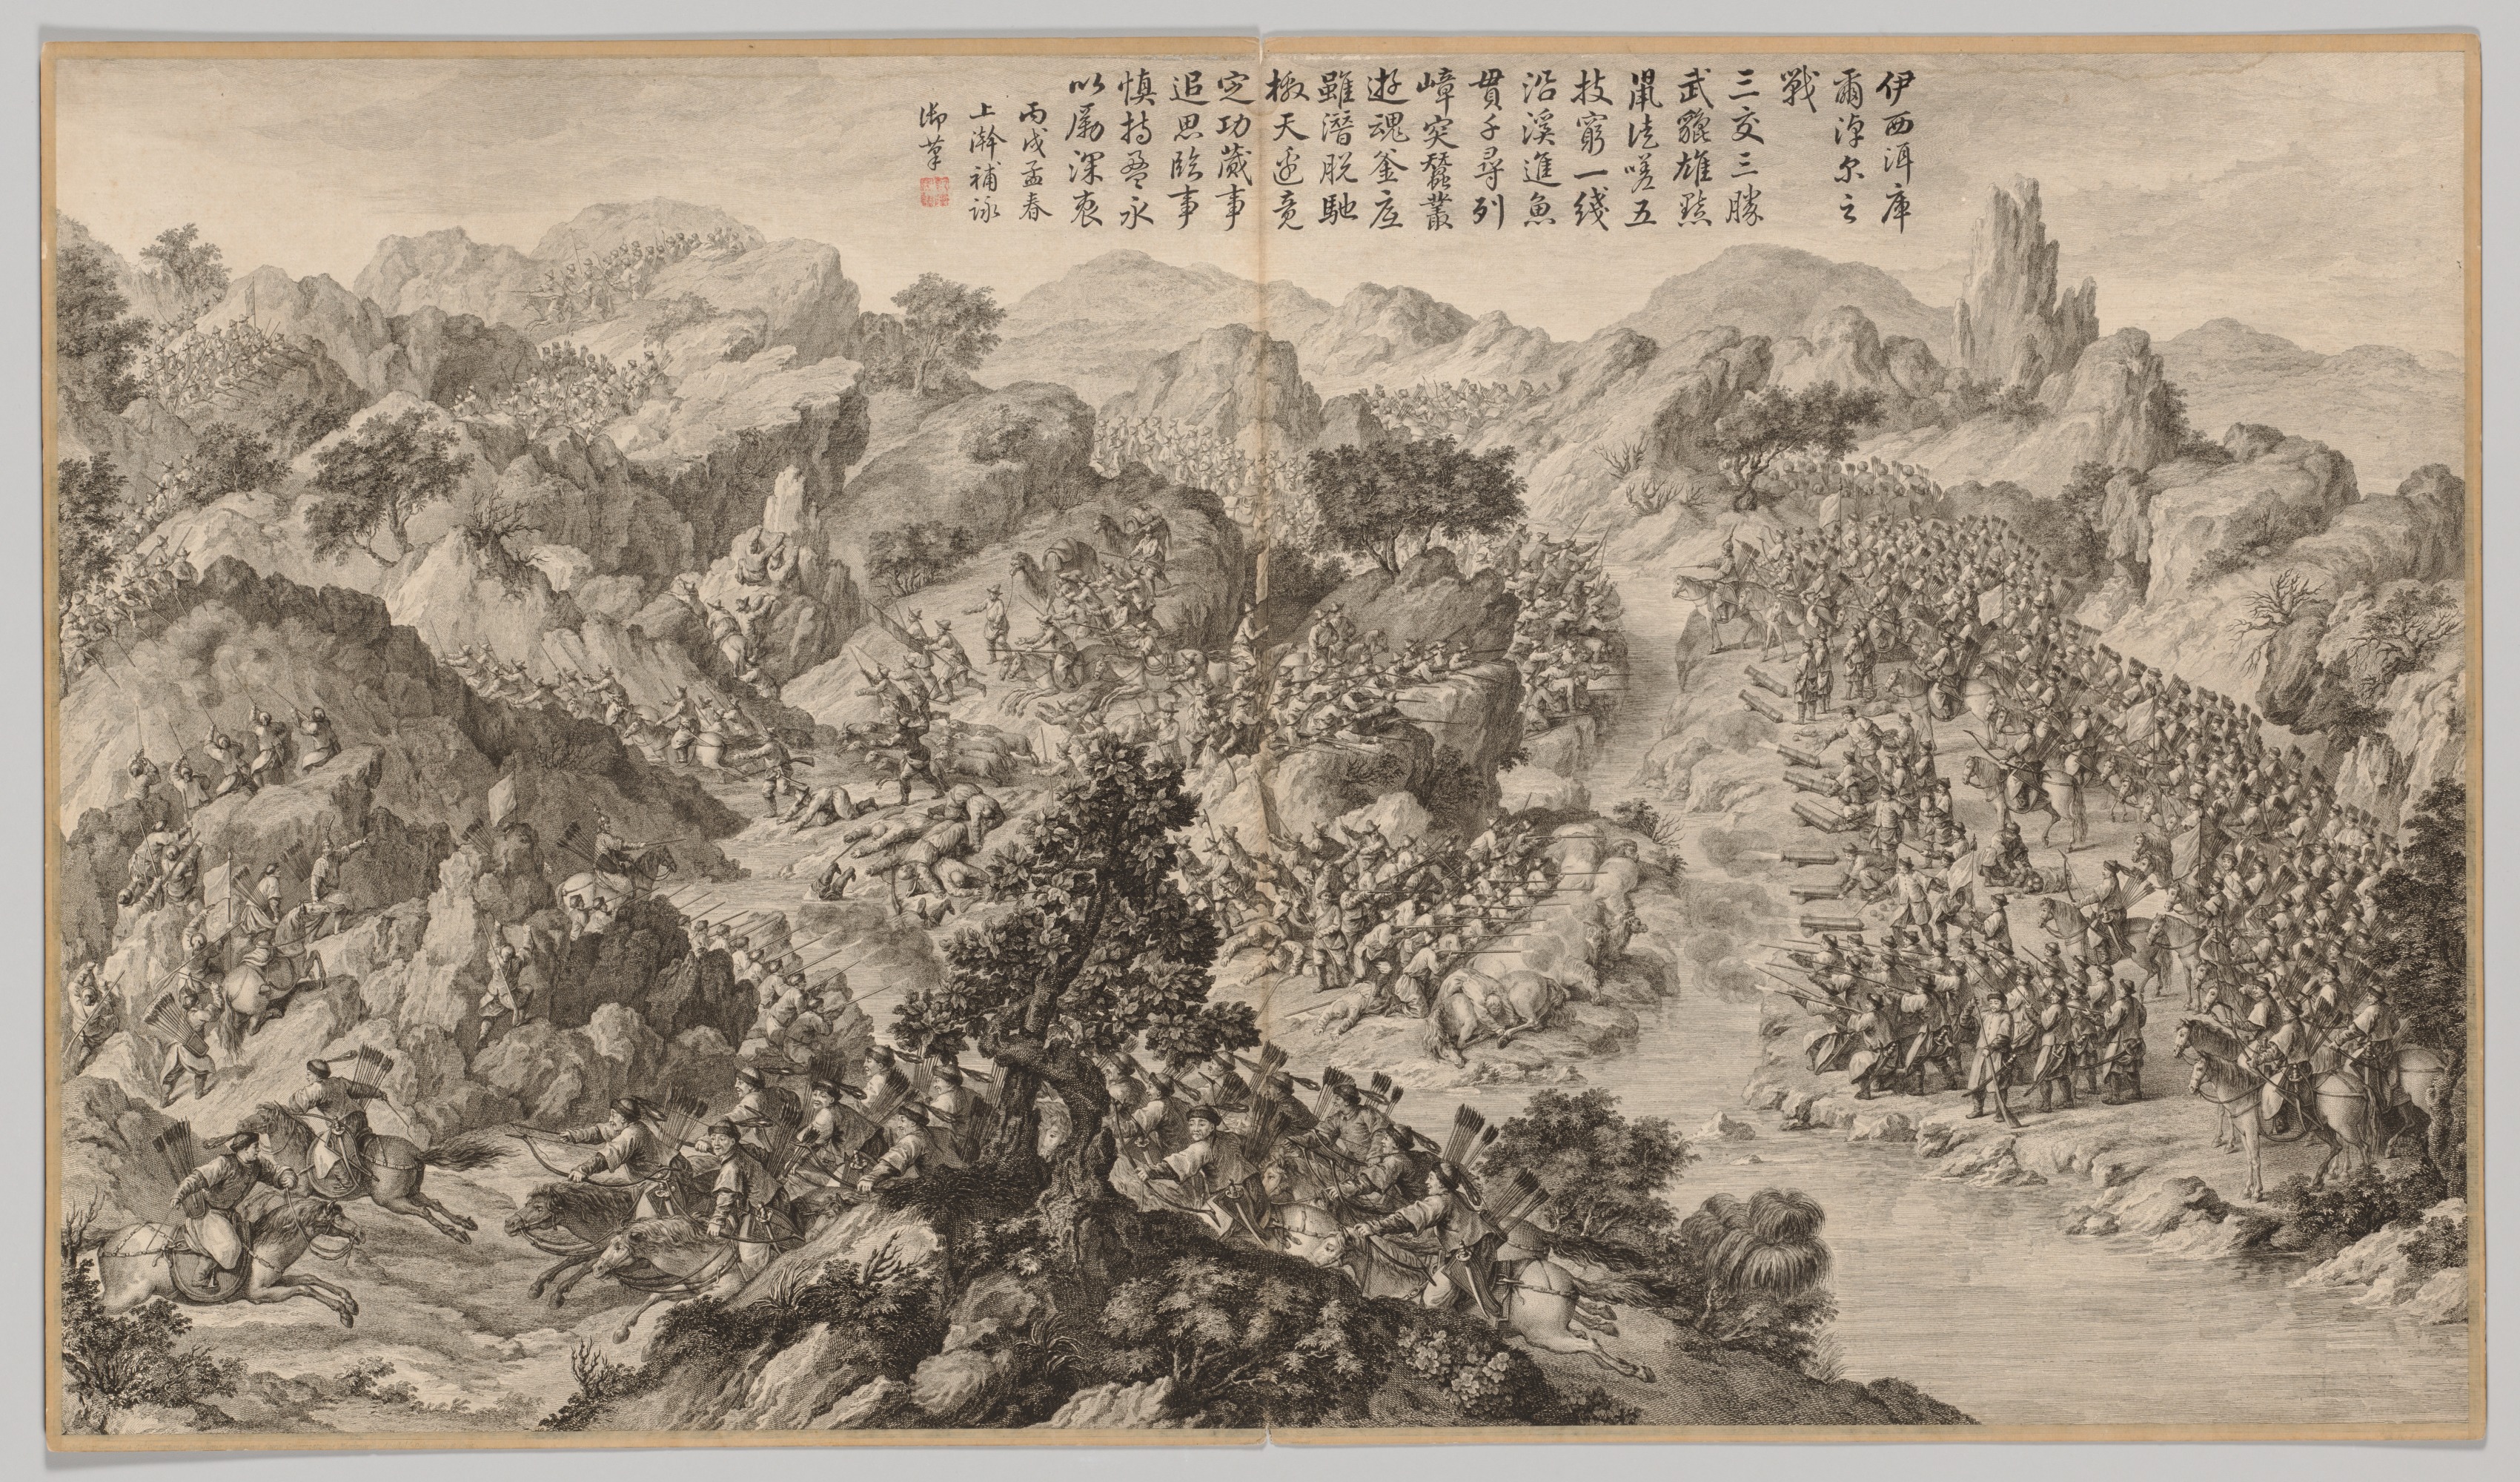 Battle at Yixi'er Ku'ernao'er: from Battle Scenes of the Quelling of Rebellions in the Western Regions, with Imperial Poems